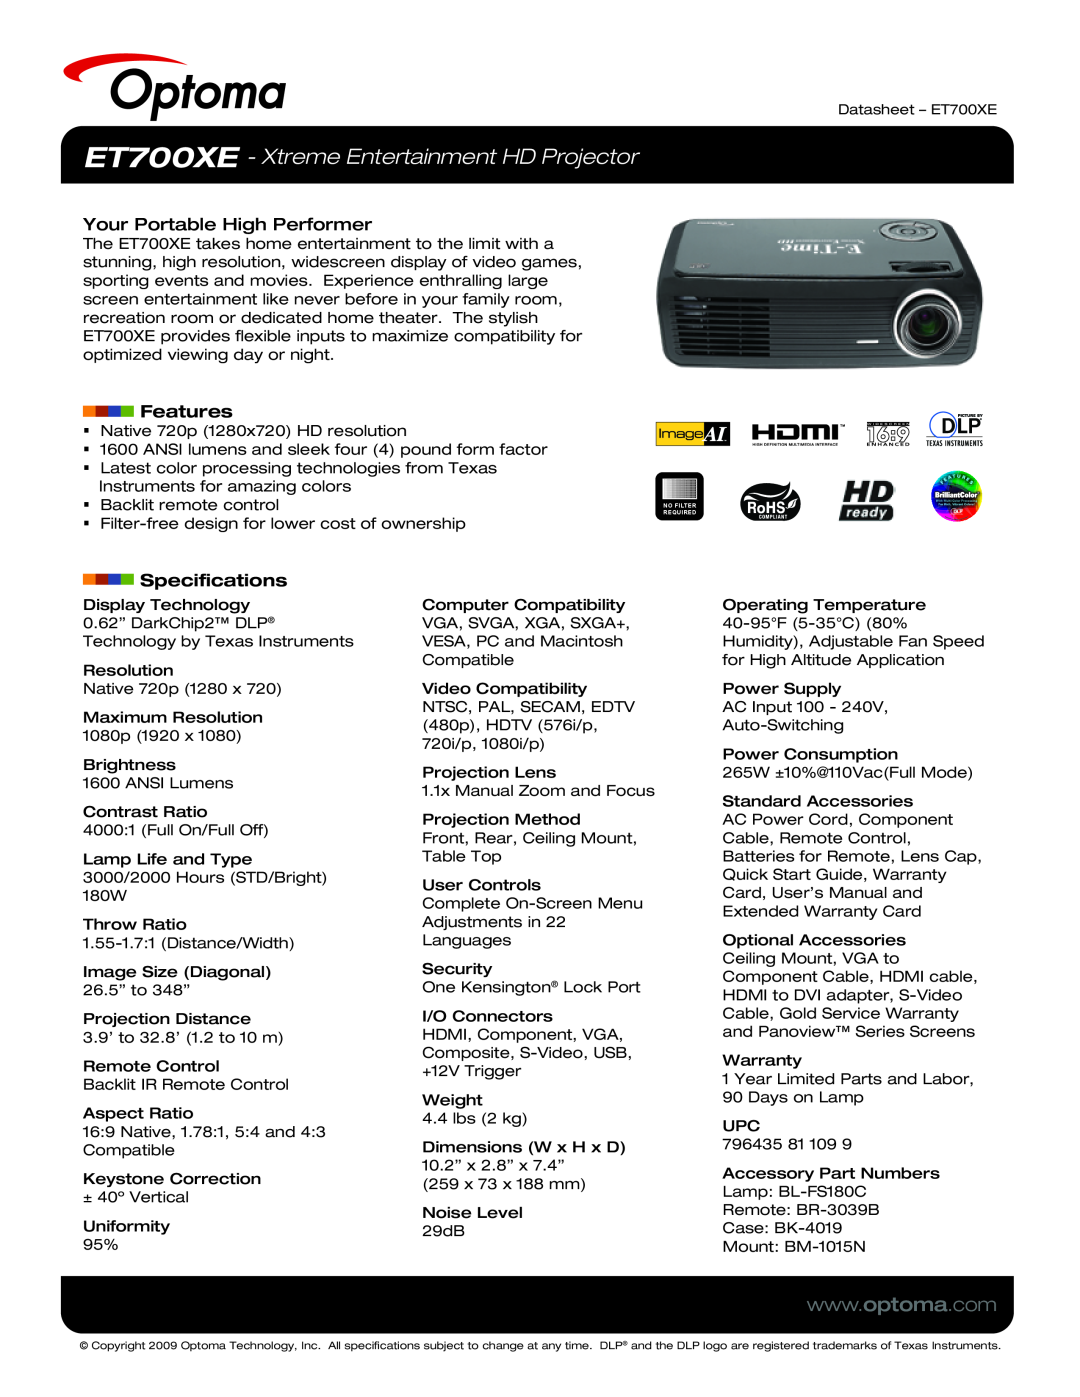 Optoma Technology specifications ET700XE - Xtreme Entertainment HD Projector, Your Portable High Performer, Features 